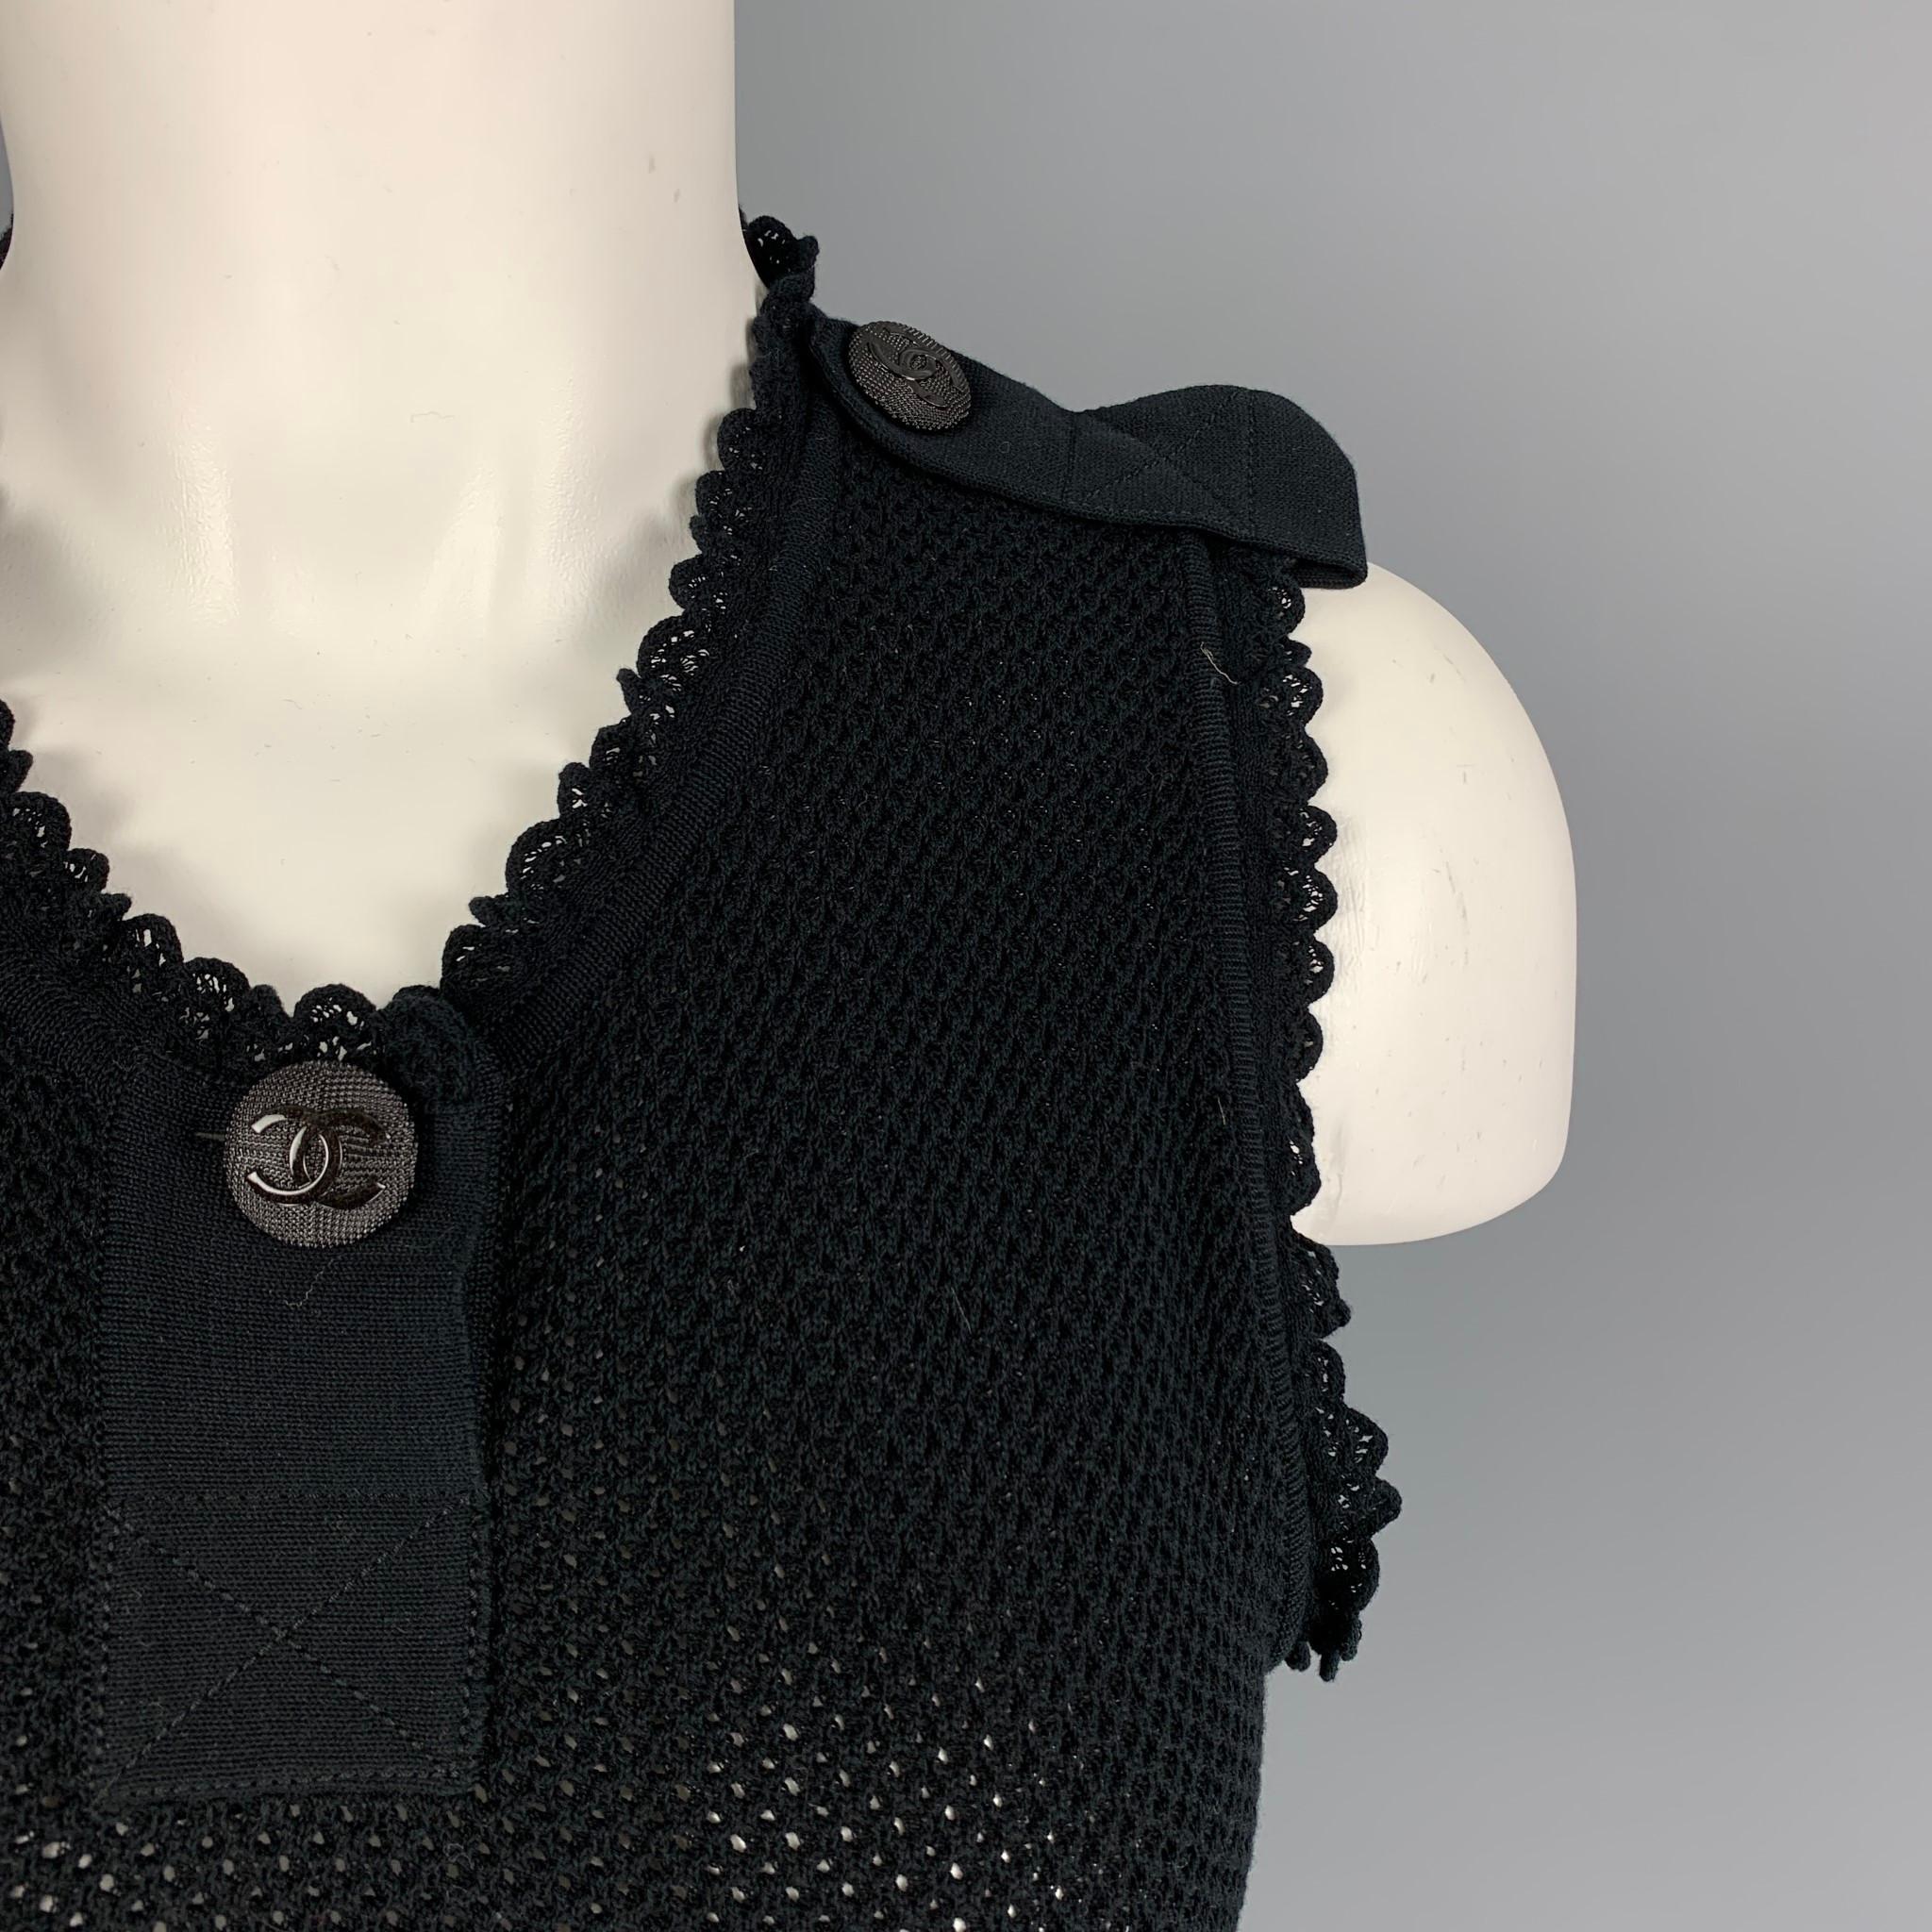 CHANEL dress comes in a black knitted stretch cotton featuring a fit & flare style, sleeveless, epaulettes, and logo button details. Made in France. 

Very Good Pre-Owned Condition.
Marked: 94305 34

Measurements:

Shoulder: 12 in.
Bust: 26